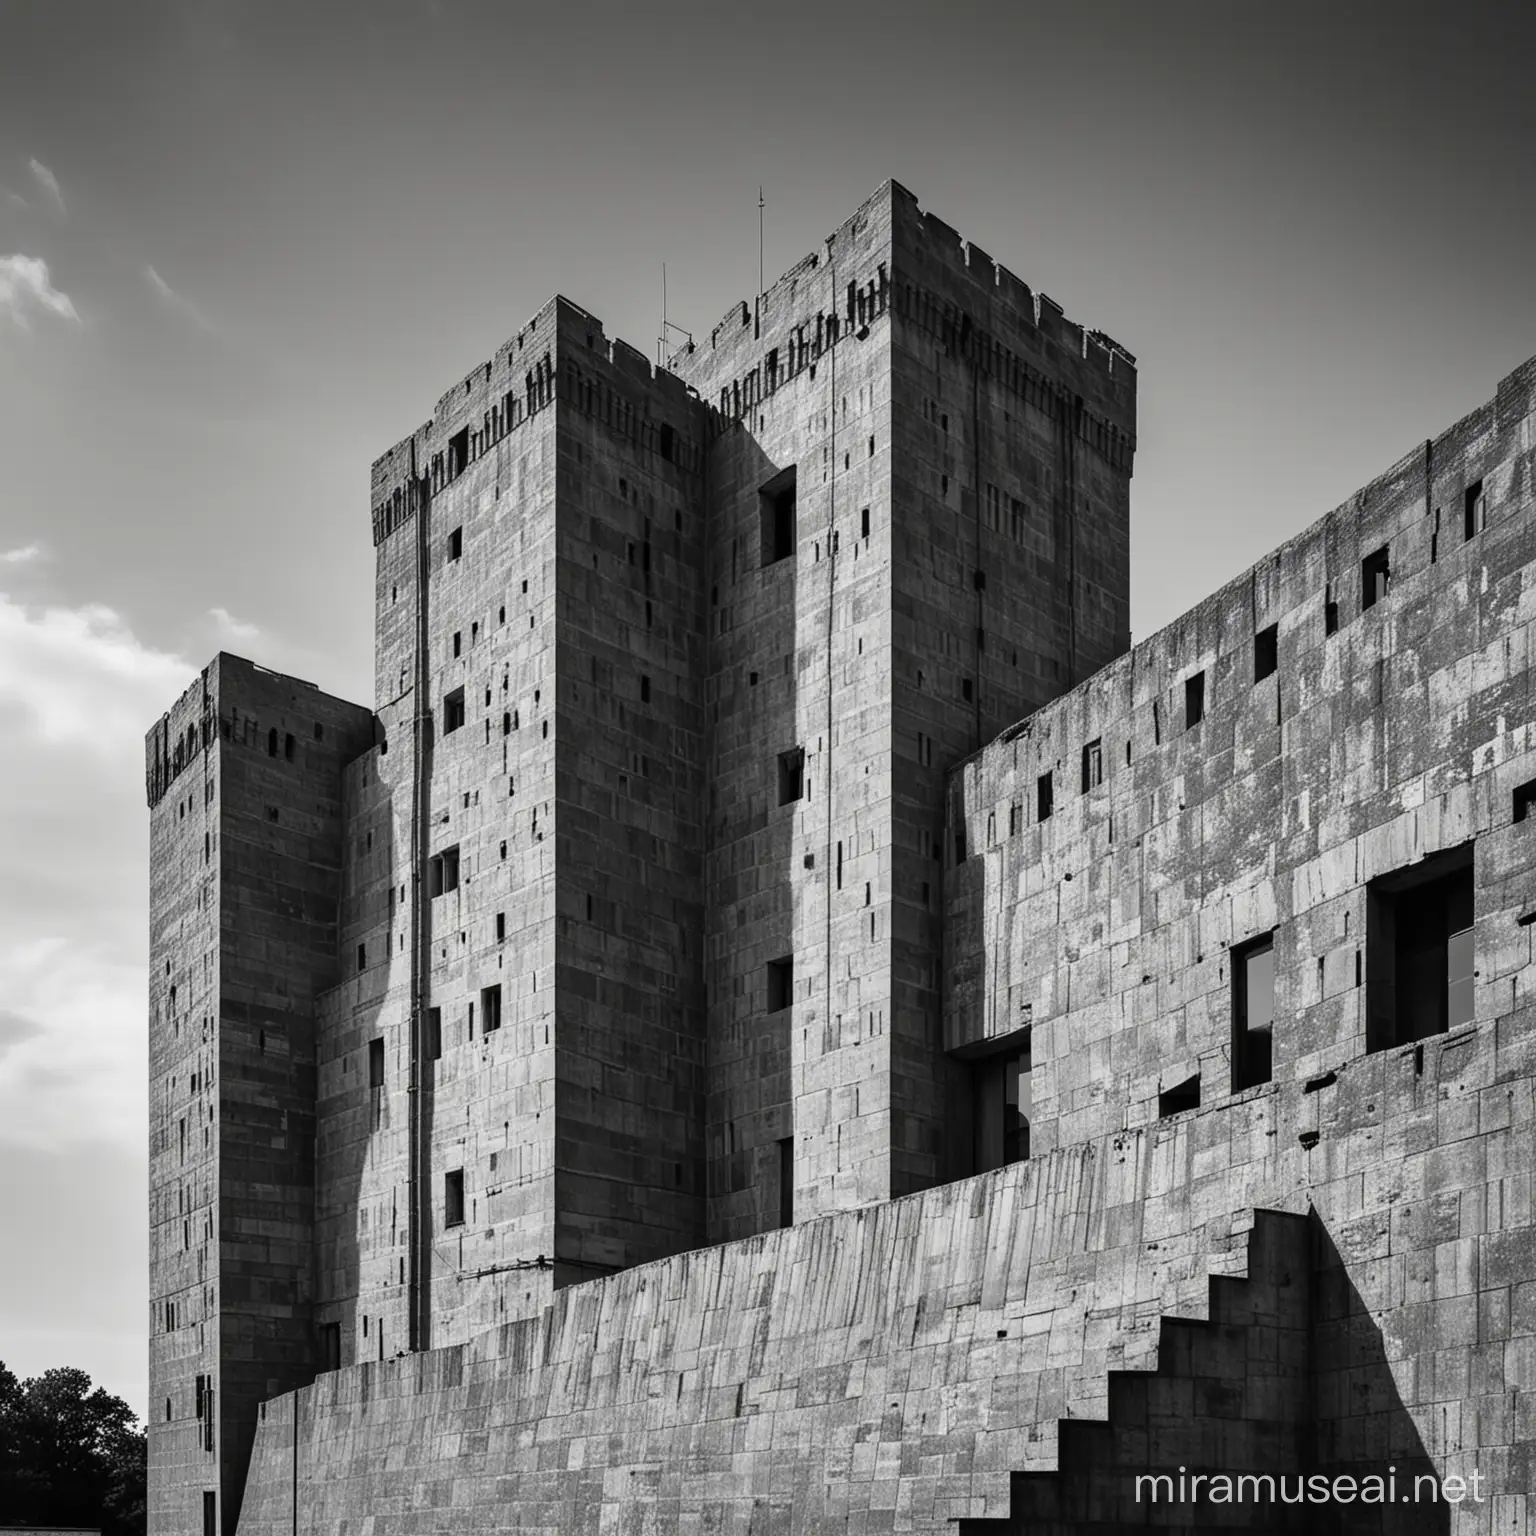 Old polish castle in modern style, dark image, grey and white, detail, light and shadow, concrete, brutalist, architecture, historic monuments, Interesting point of view 